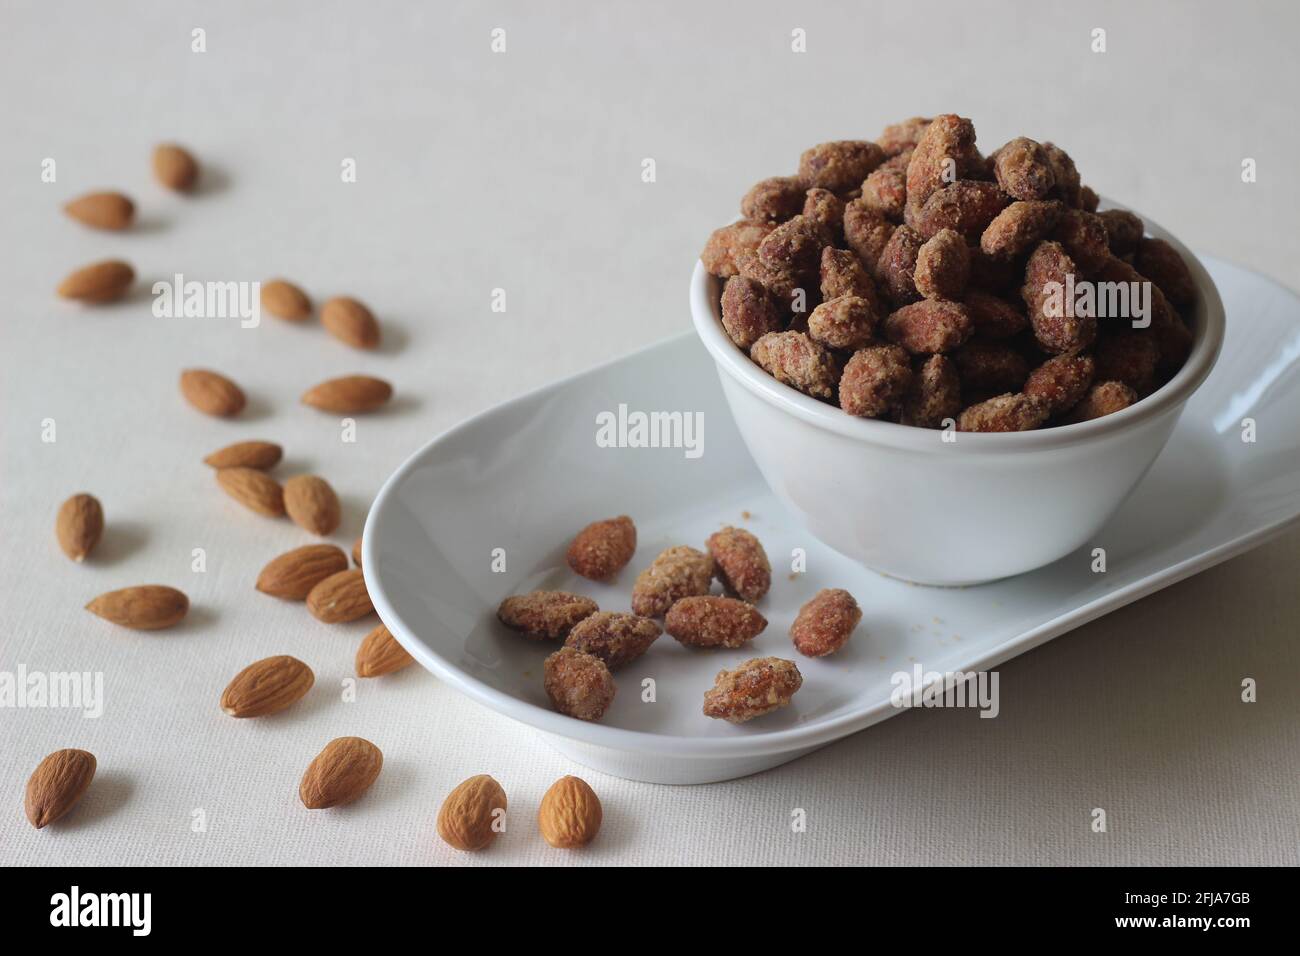 Candied almonds that are crunchy and golden brown. Shot on white background. Stock Photo